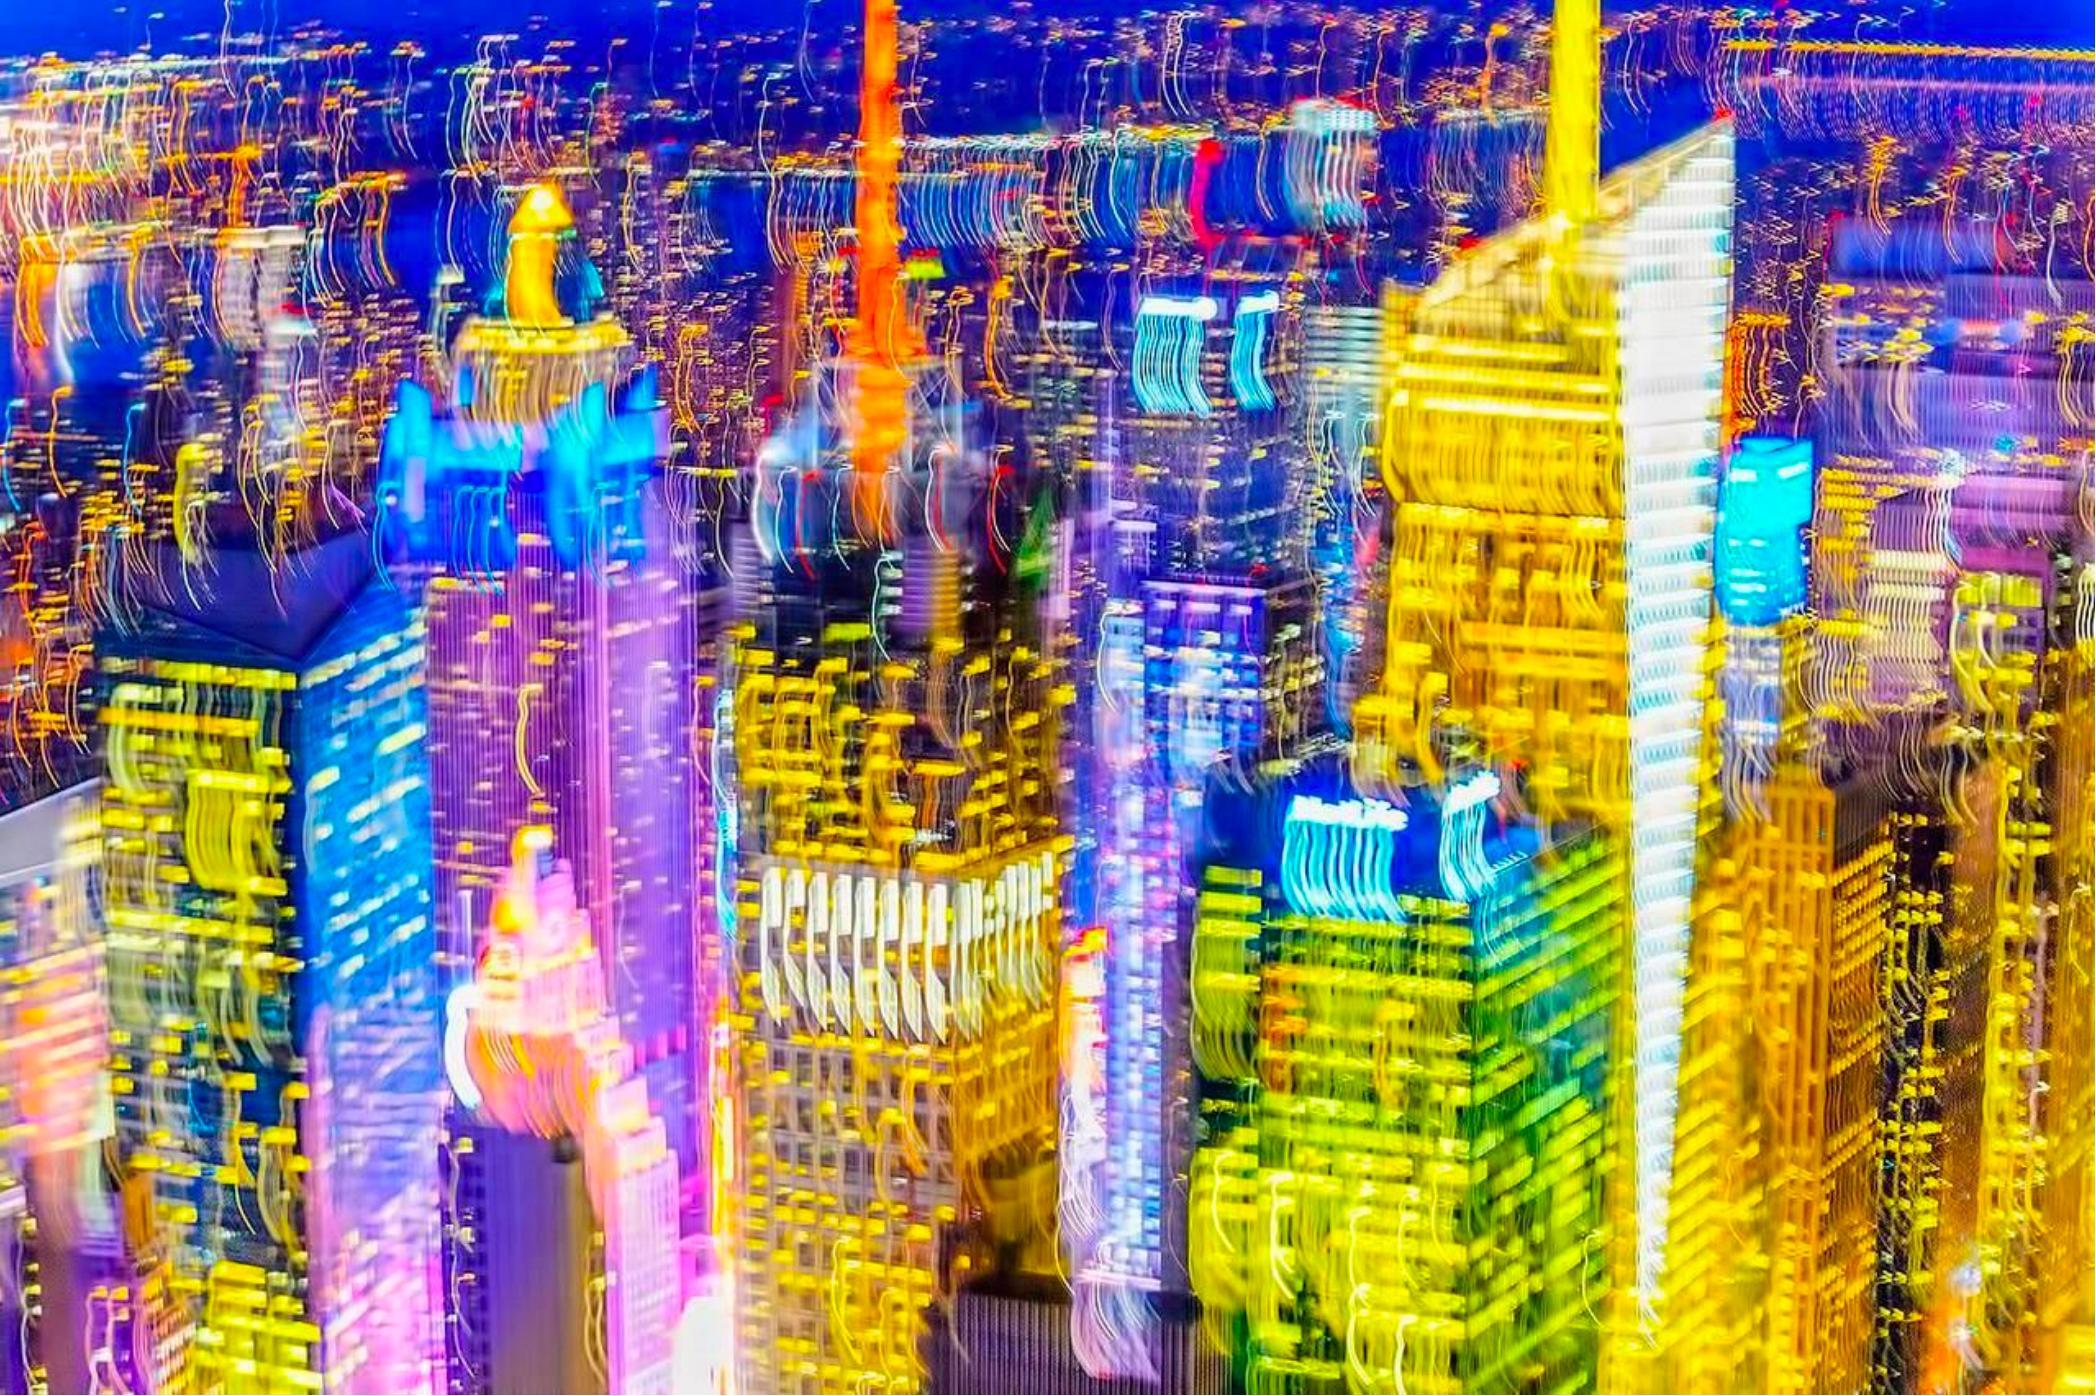 Mitchell Funk Landscape Photograph - Blurred Colorful New York Skyline